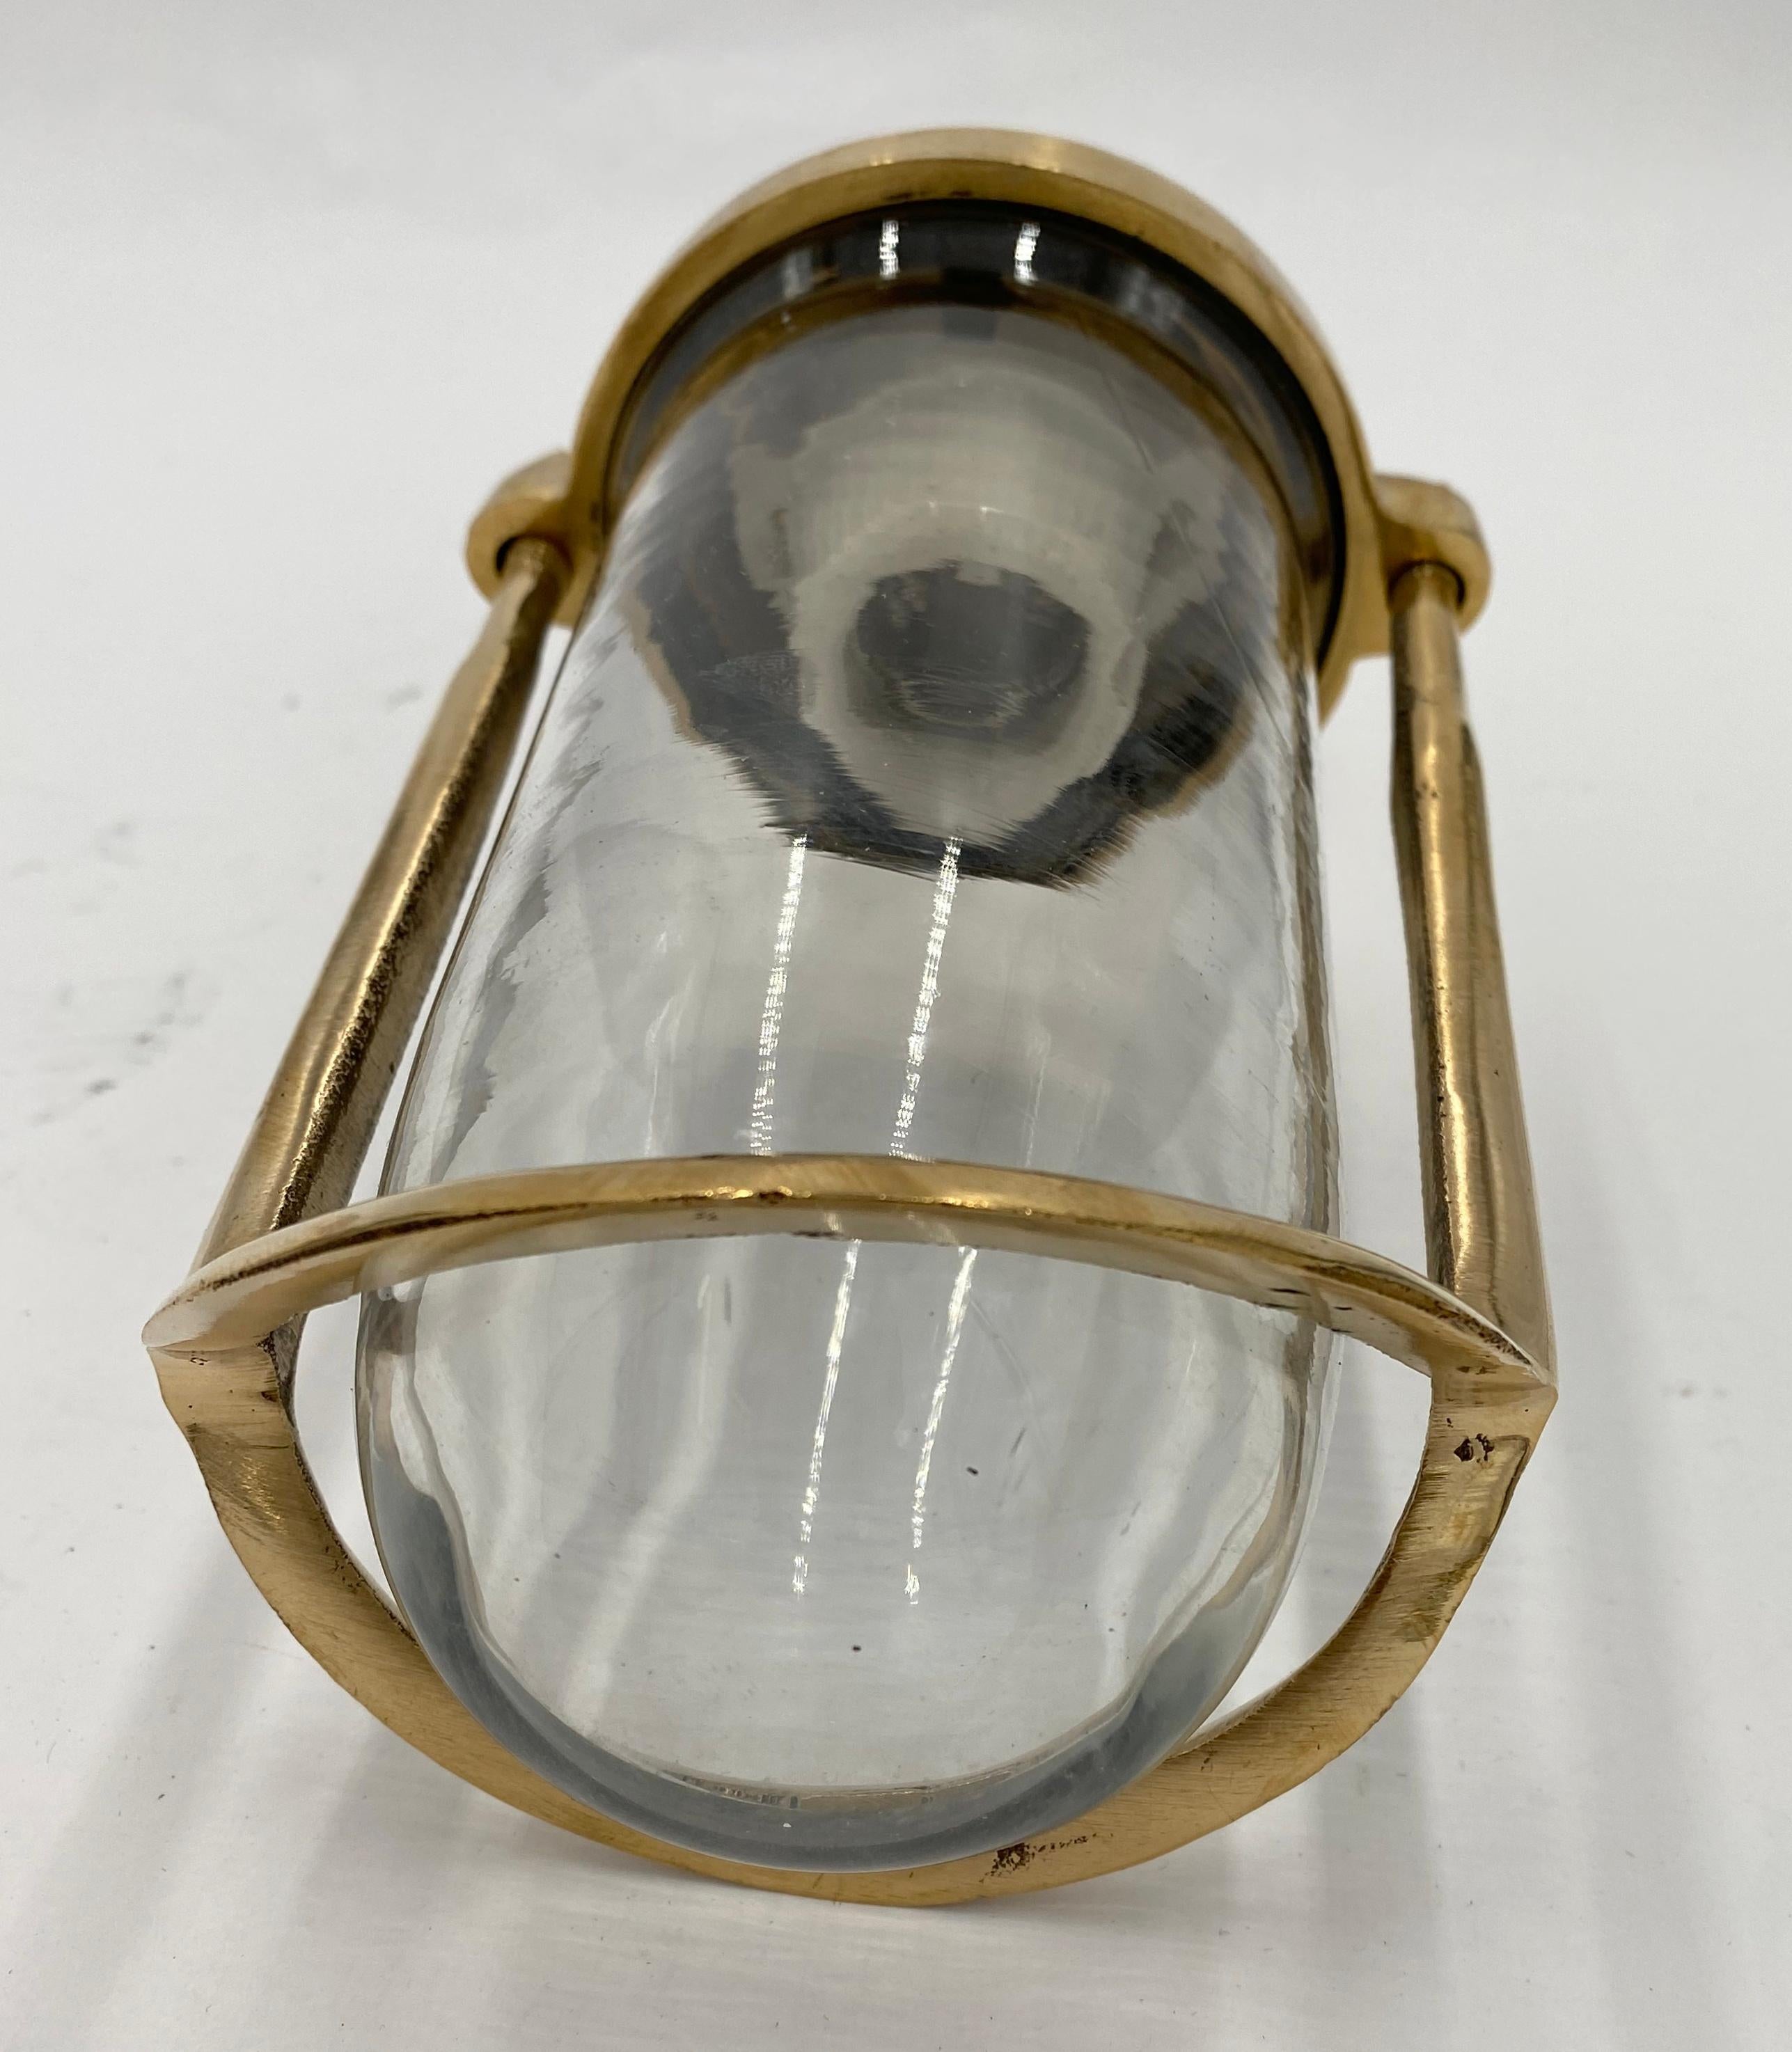 Slim sleek polished brass nautical ship wall sconce light. Takes one standard E26 light bulb. Cleaned and rewired. Small quantity available at time of posting. Please inquire. Priced each. Please note, this item is located in one of our NYC